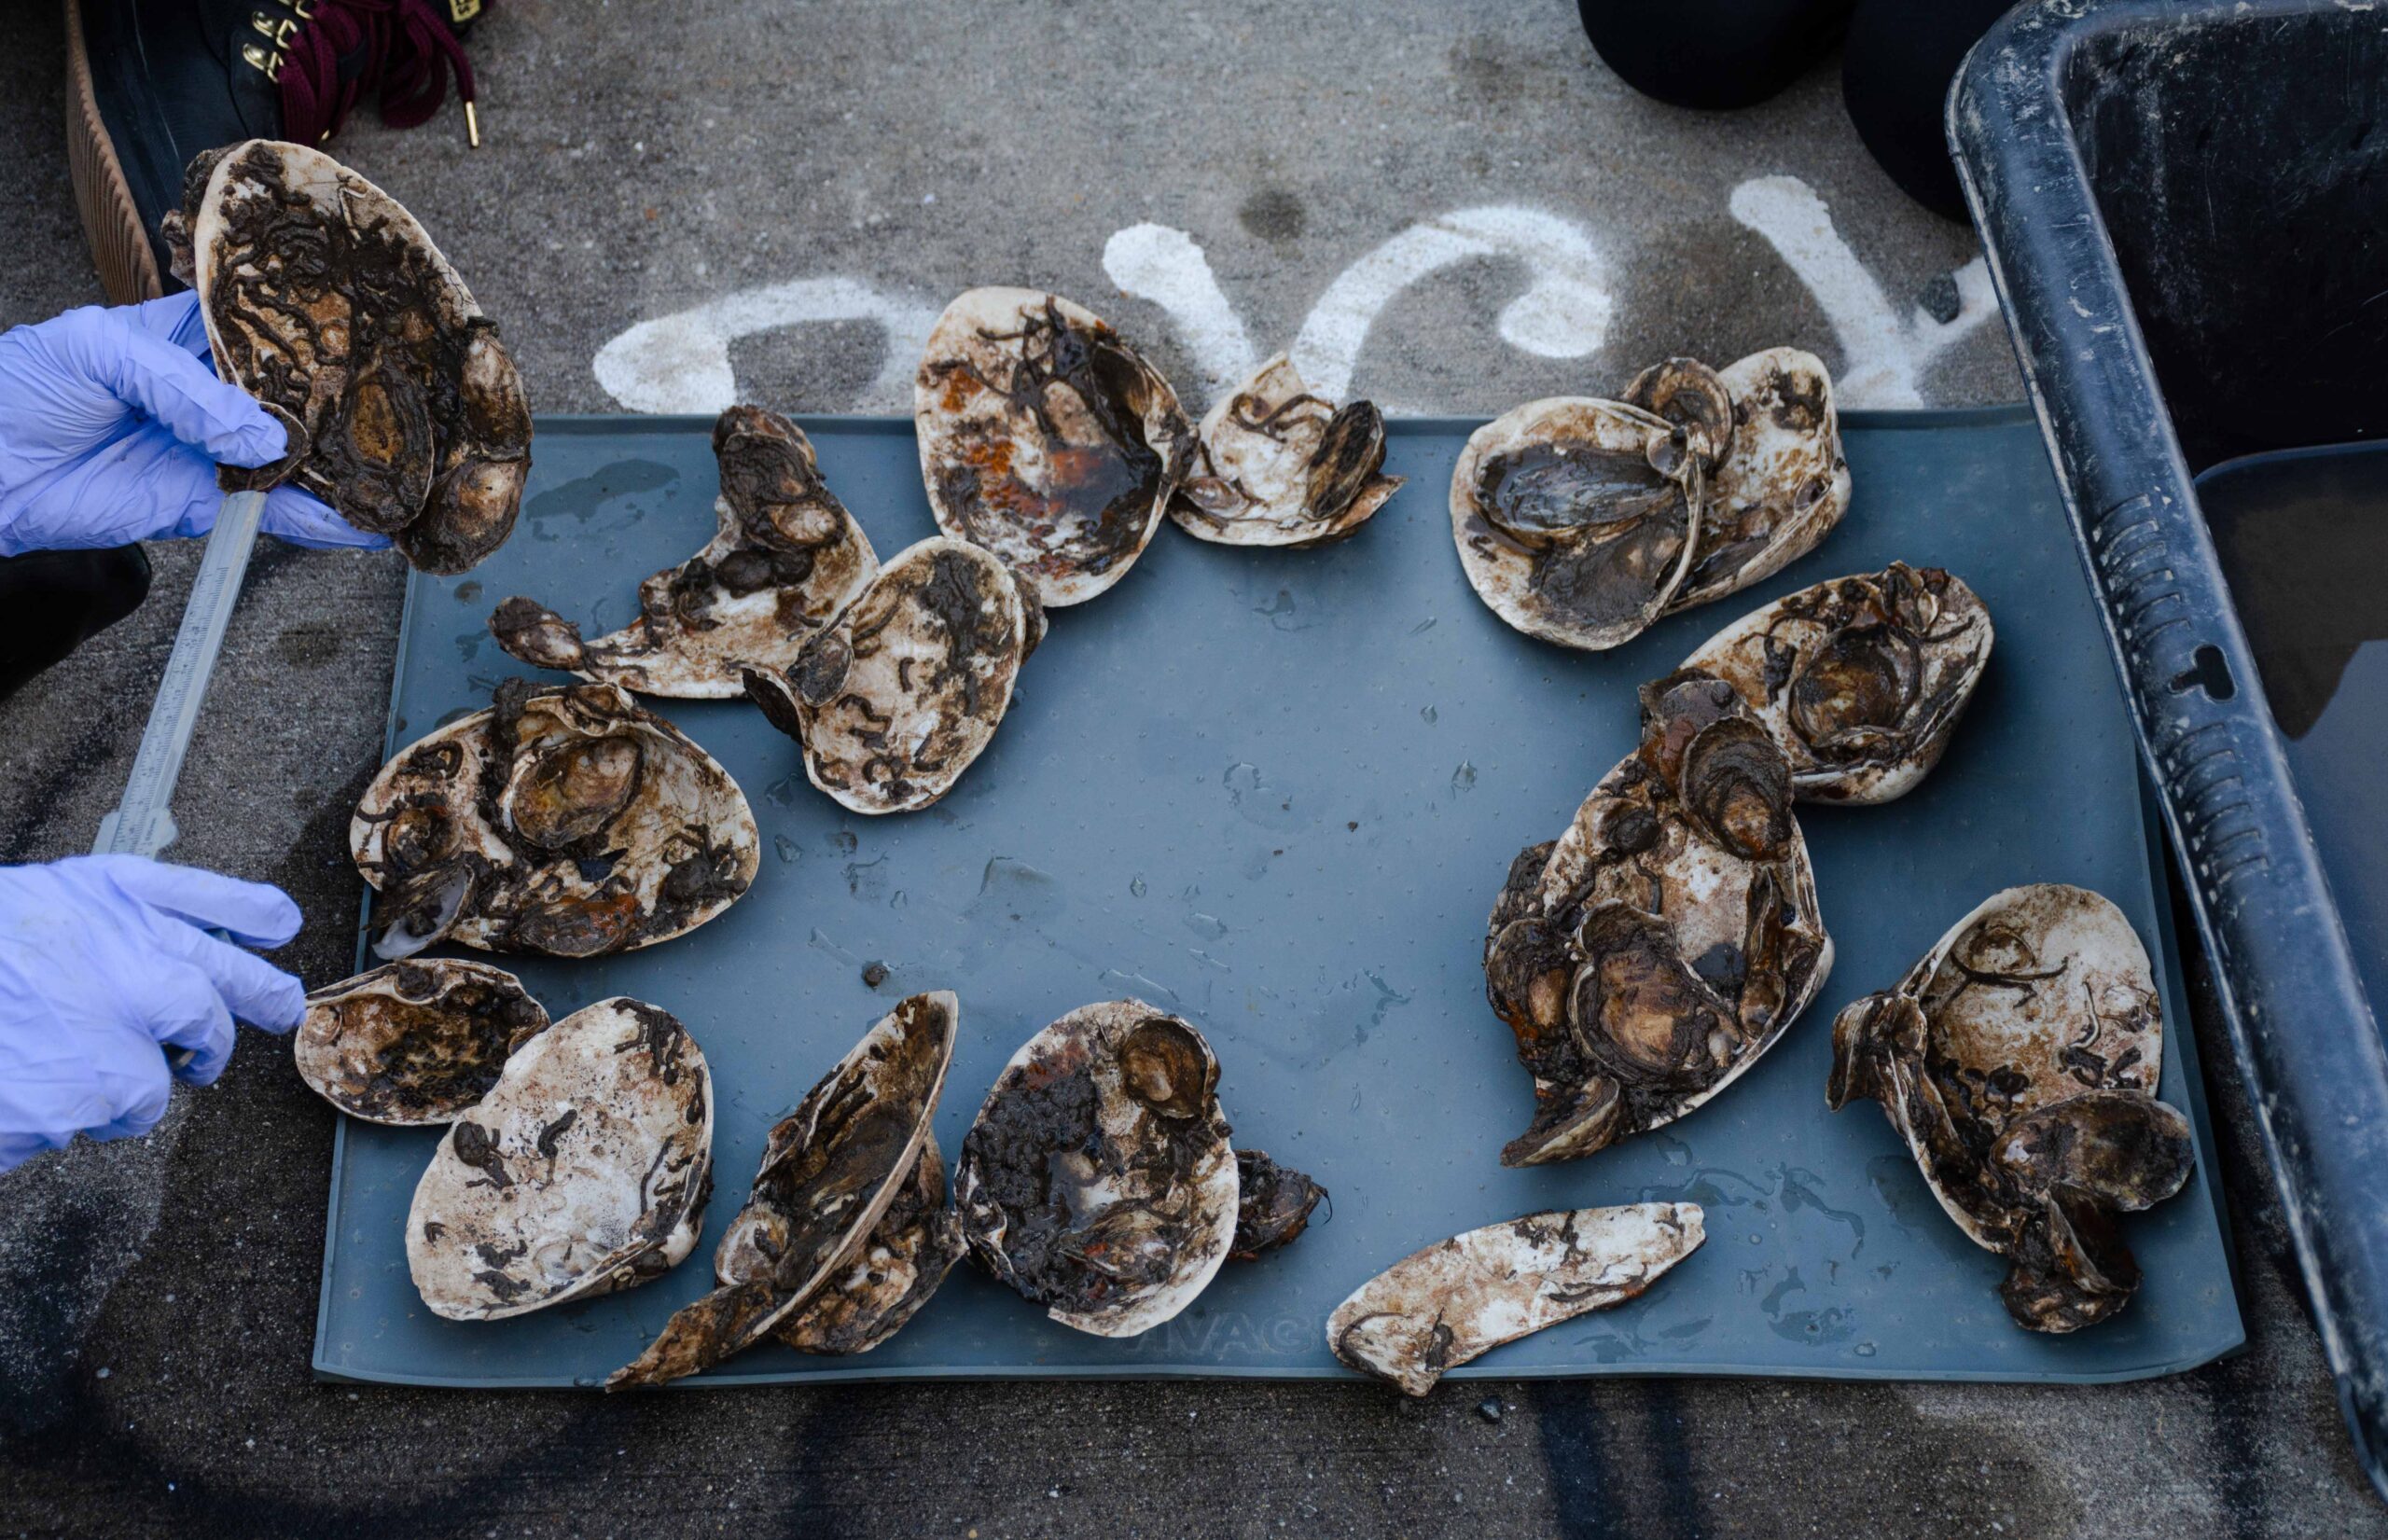 Oysters from the Domino Park research station in Williamsburg.